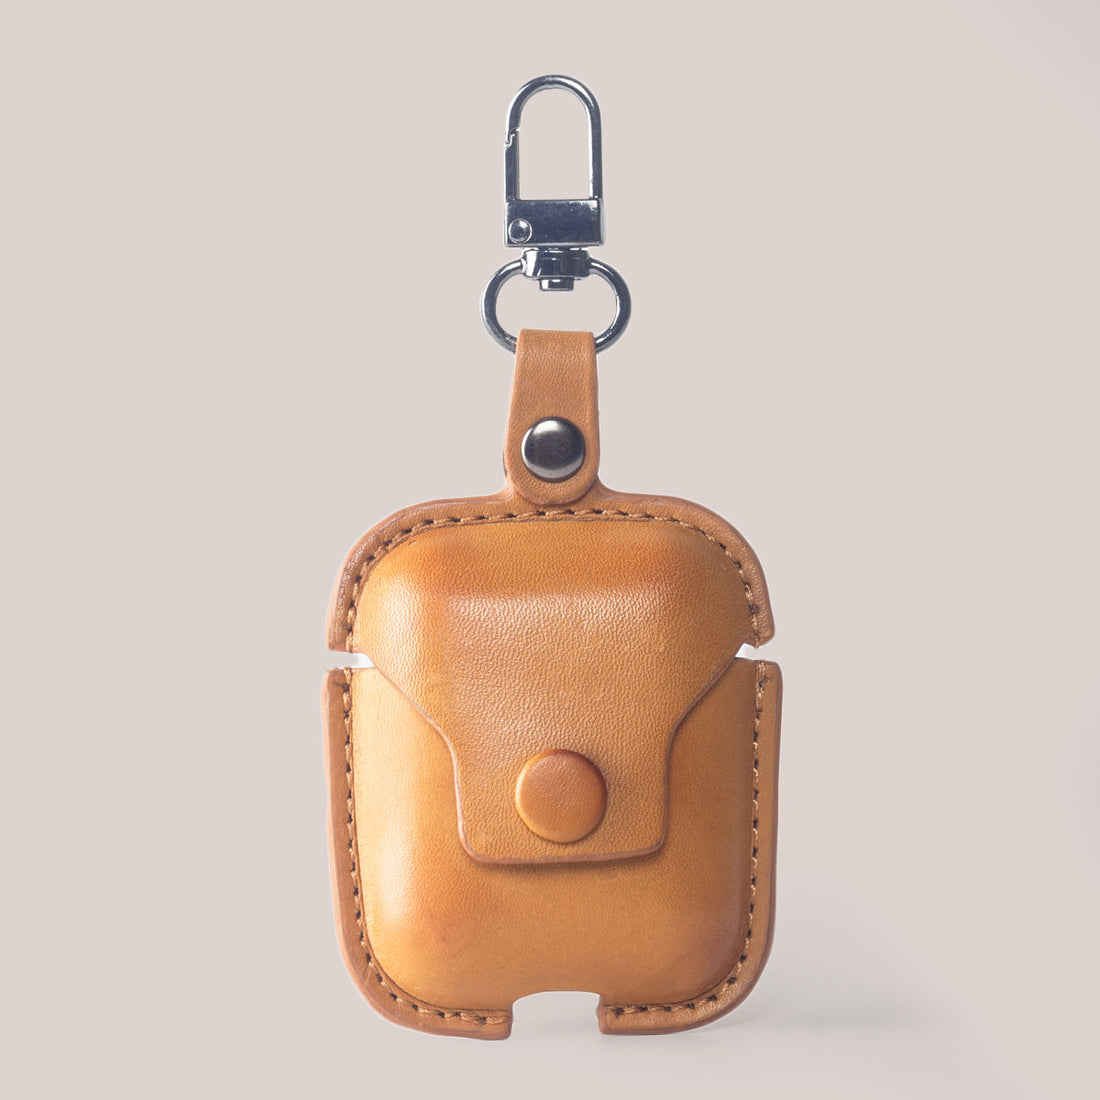 Shop Leather Protective Air-pod Case Cover Online